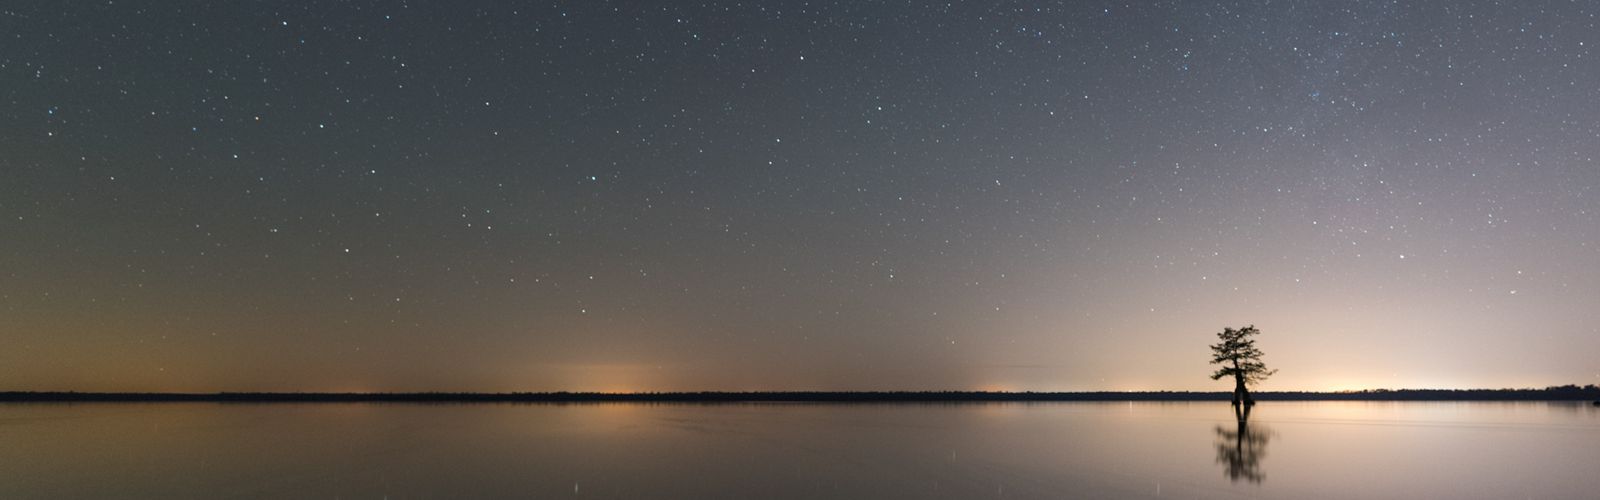 Twilight on a body of water with the sun just below the horizon and the stars visible.